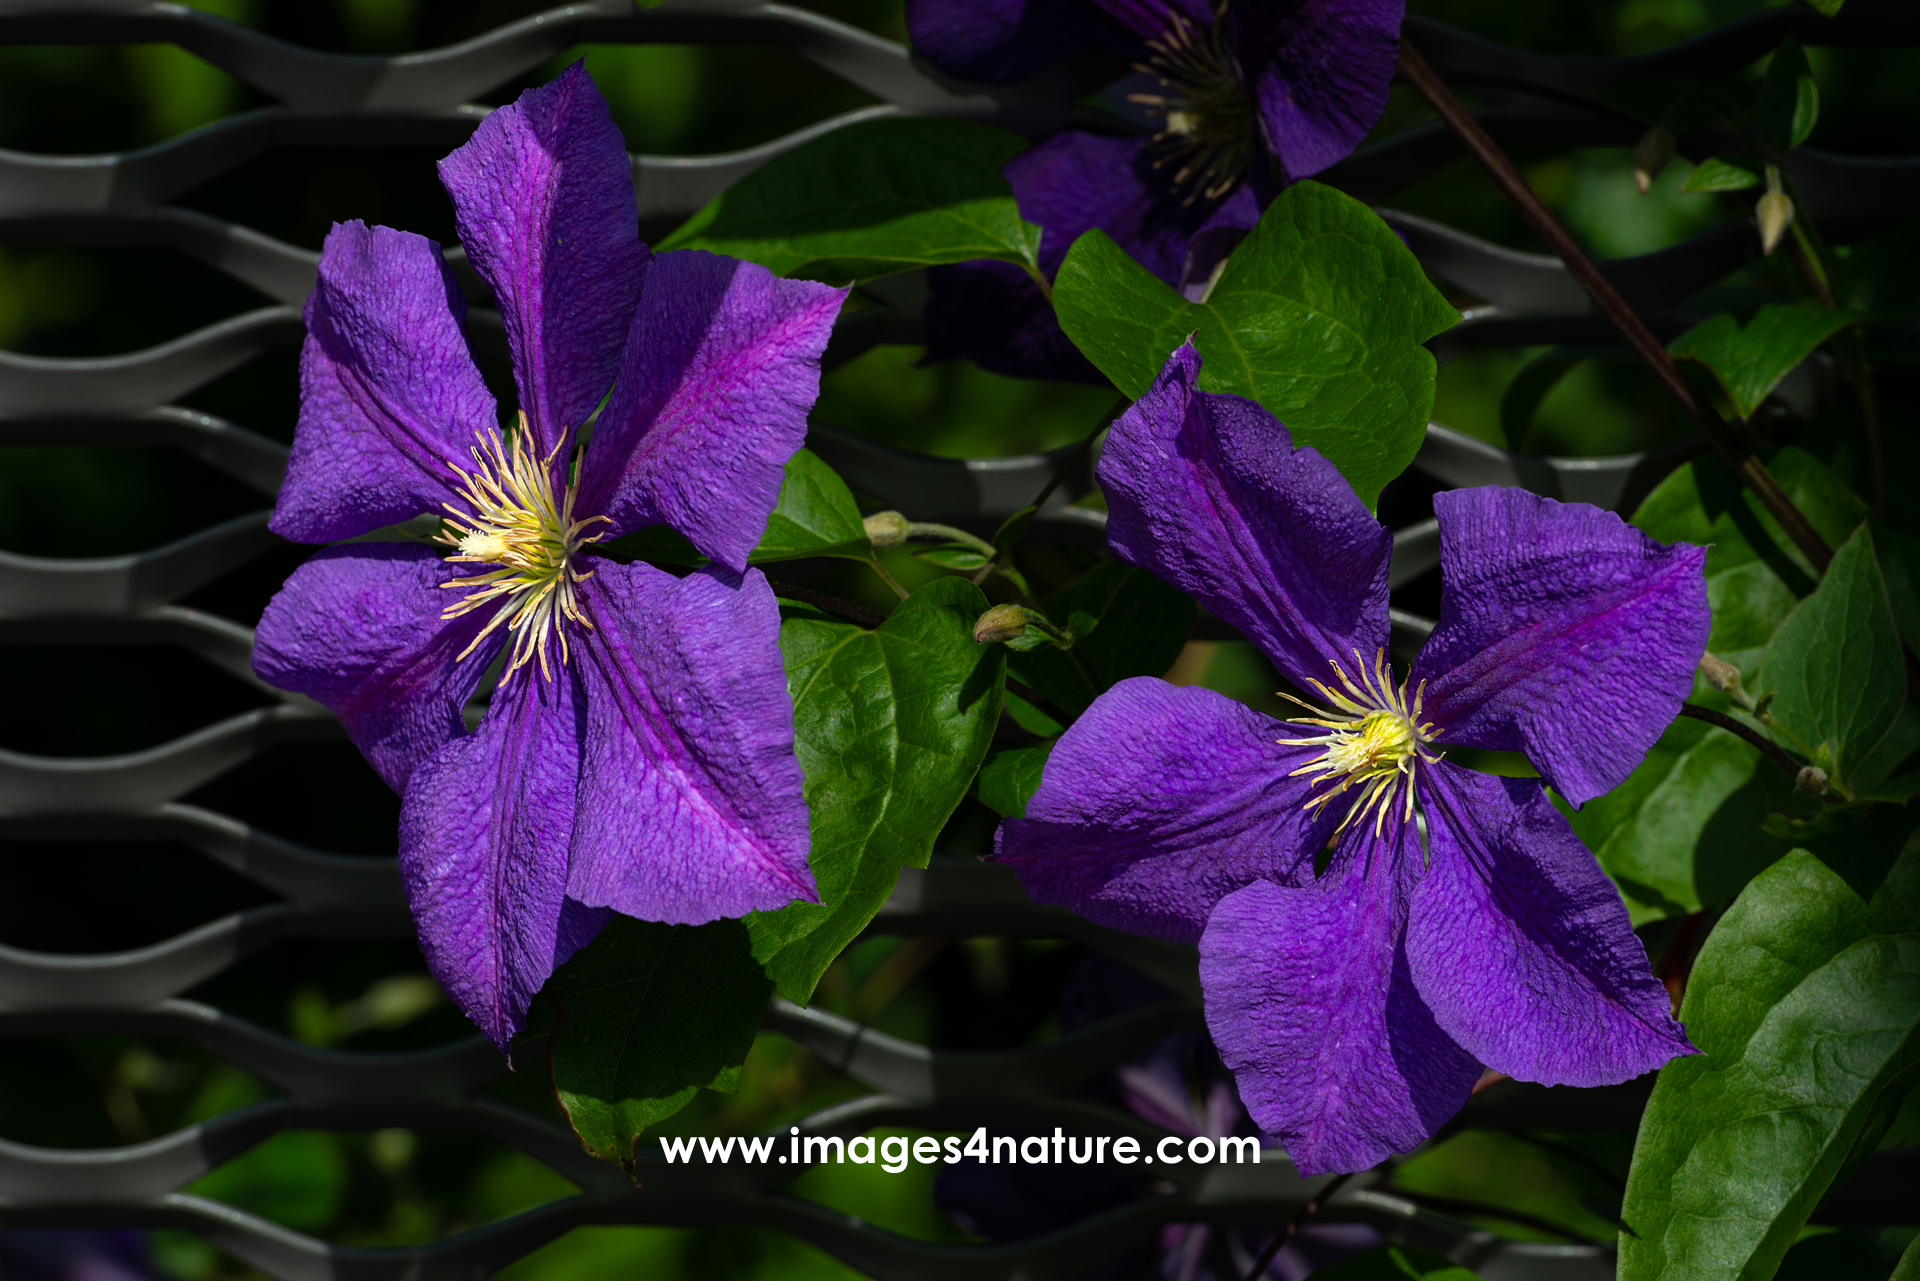 Two large dark purple clematis flowers with green leaves growing though a solid metal fence